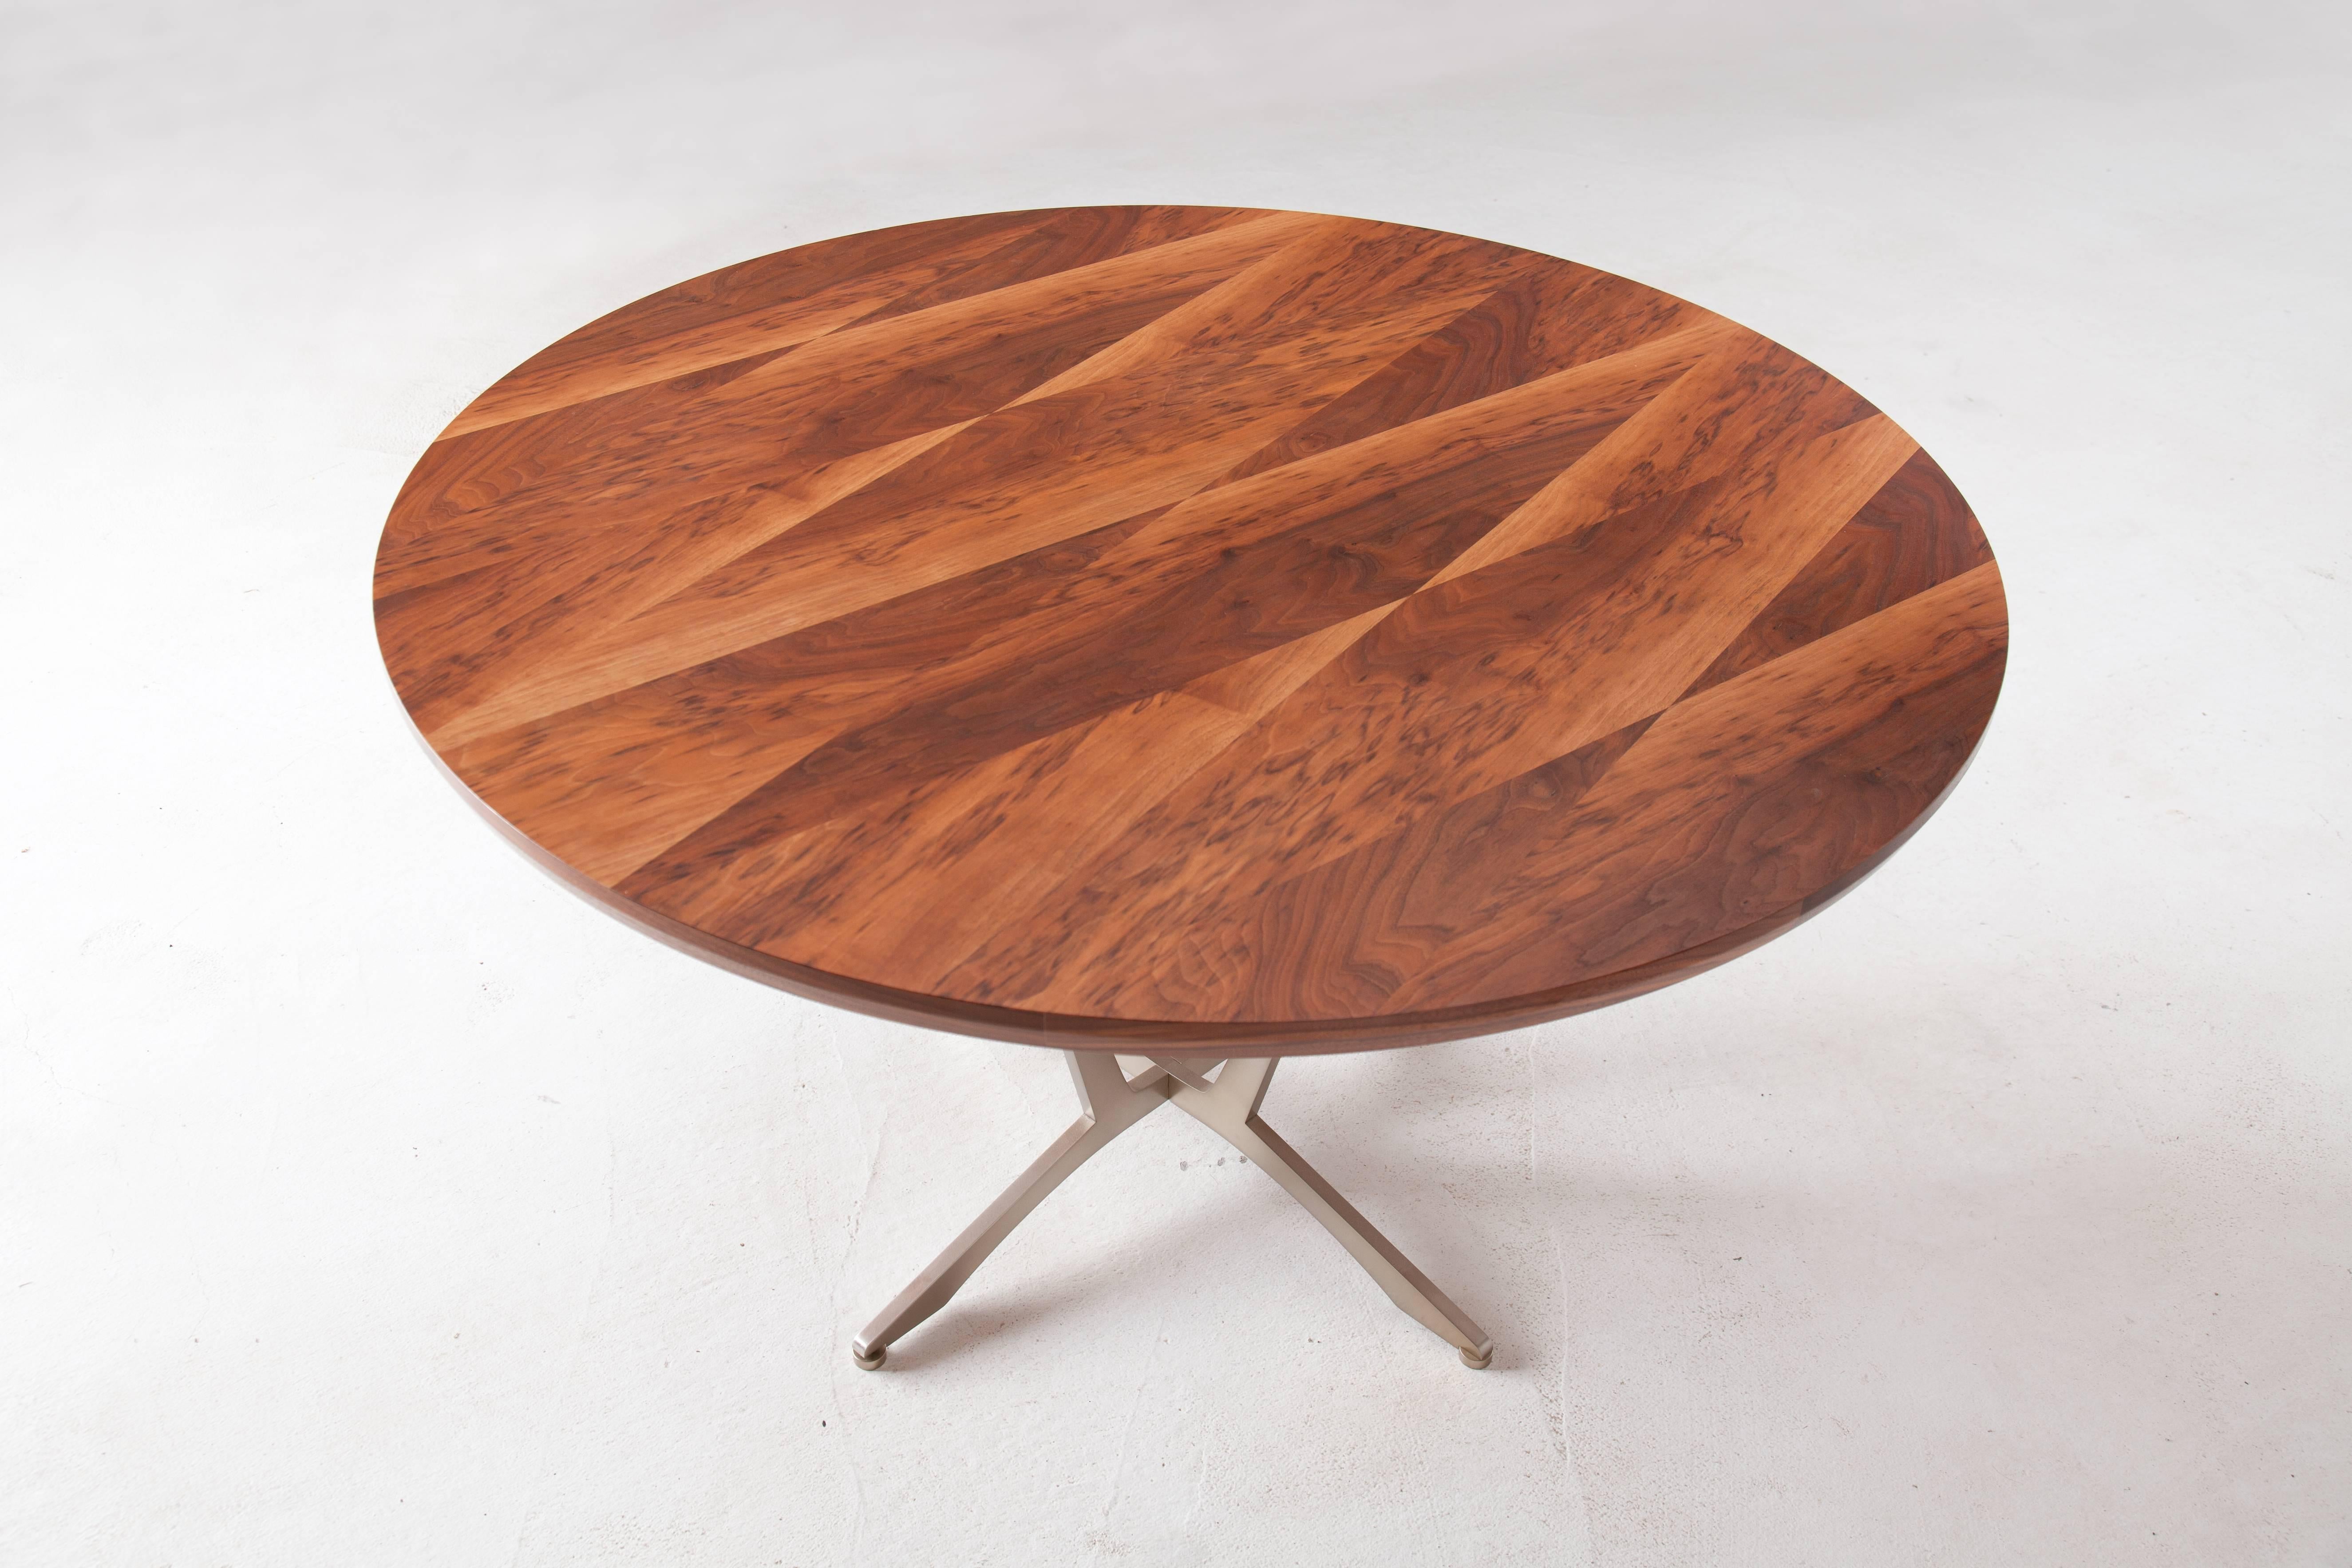 The Robson Table has a classic circular shape and elegant woodwork. Available in a variety of American hardwoods with surface patterns ranging from simple flat sawn to geometric (shown). Each piece is made to order, so dimensions, hardwood, pattern